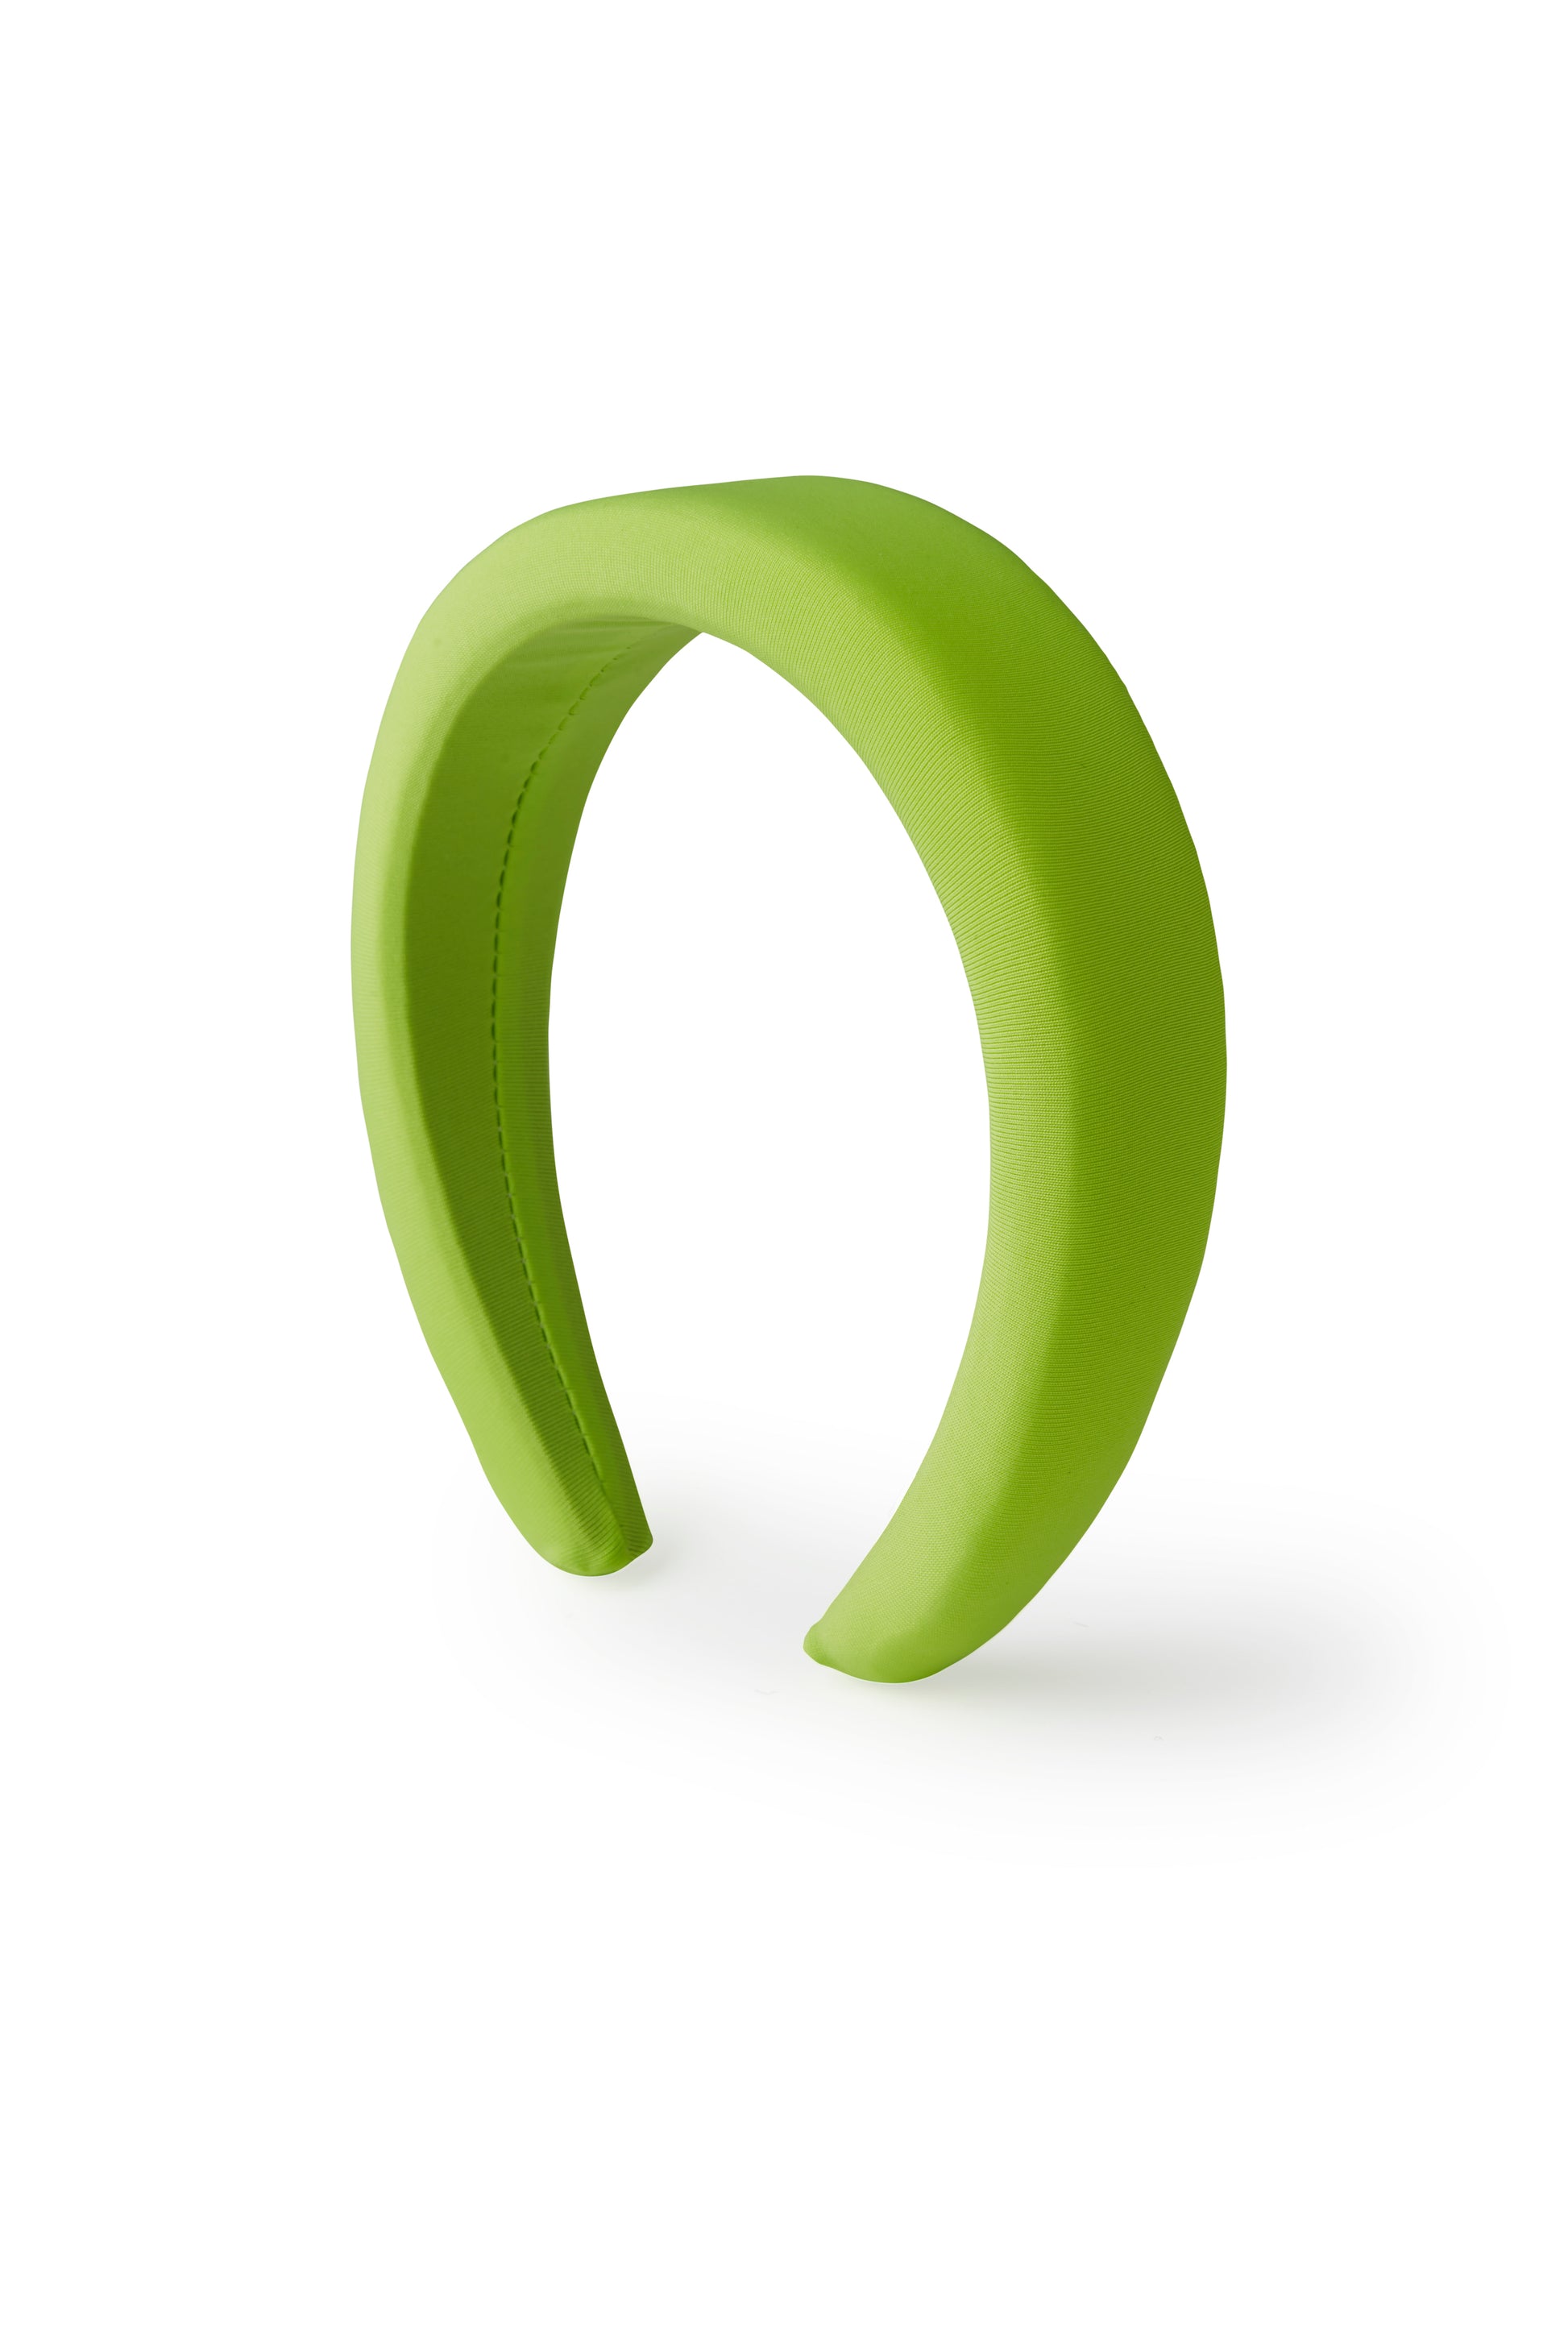 Padded hairband in neon green color